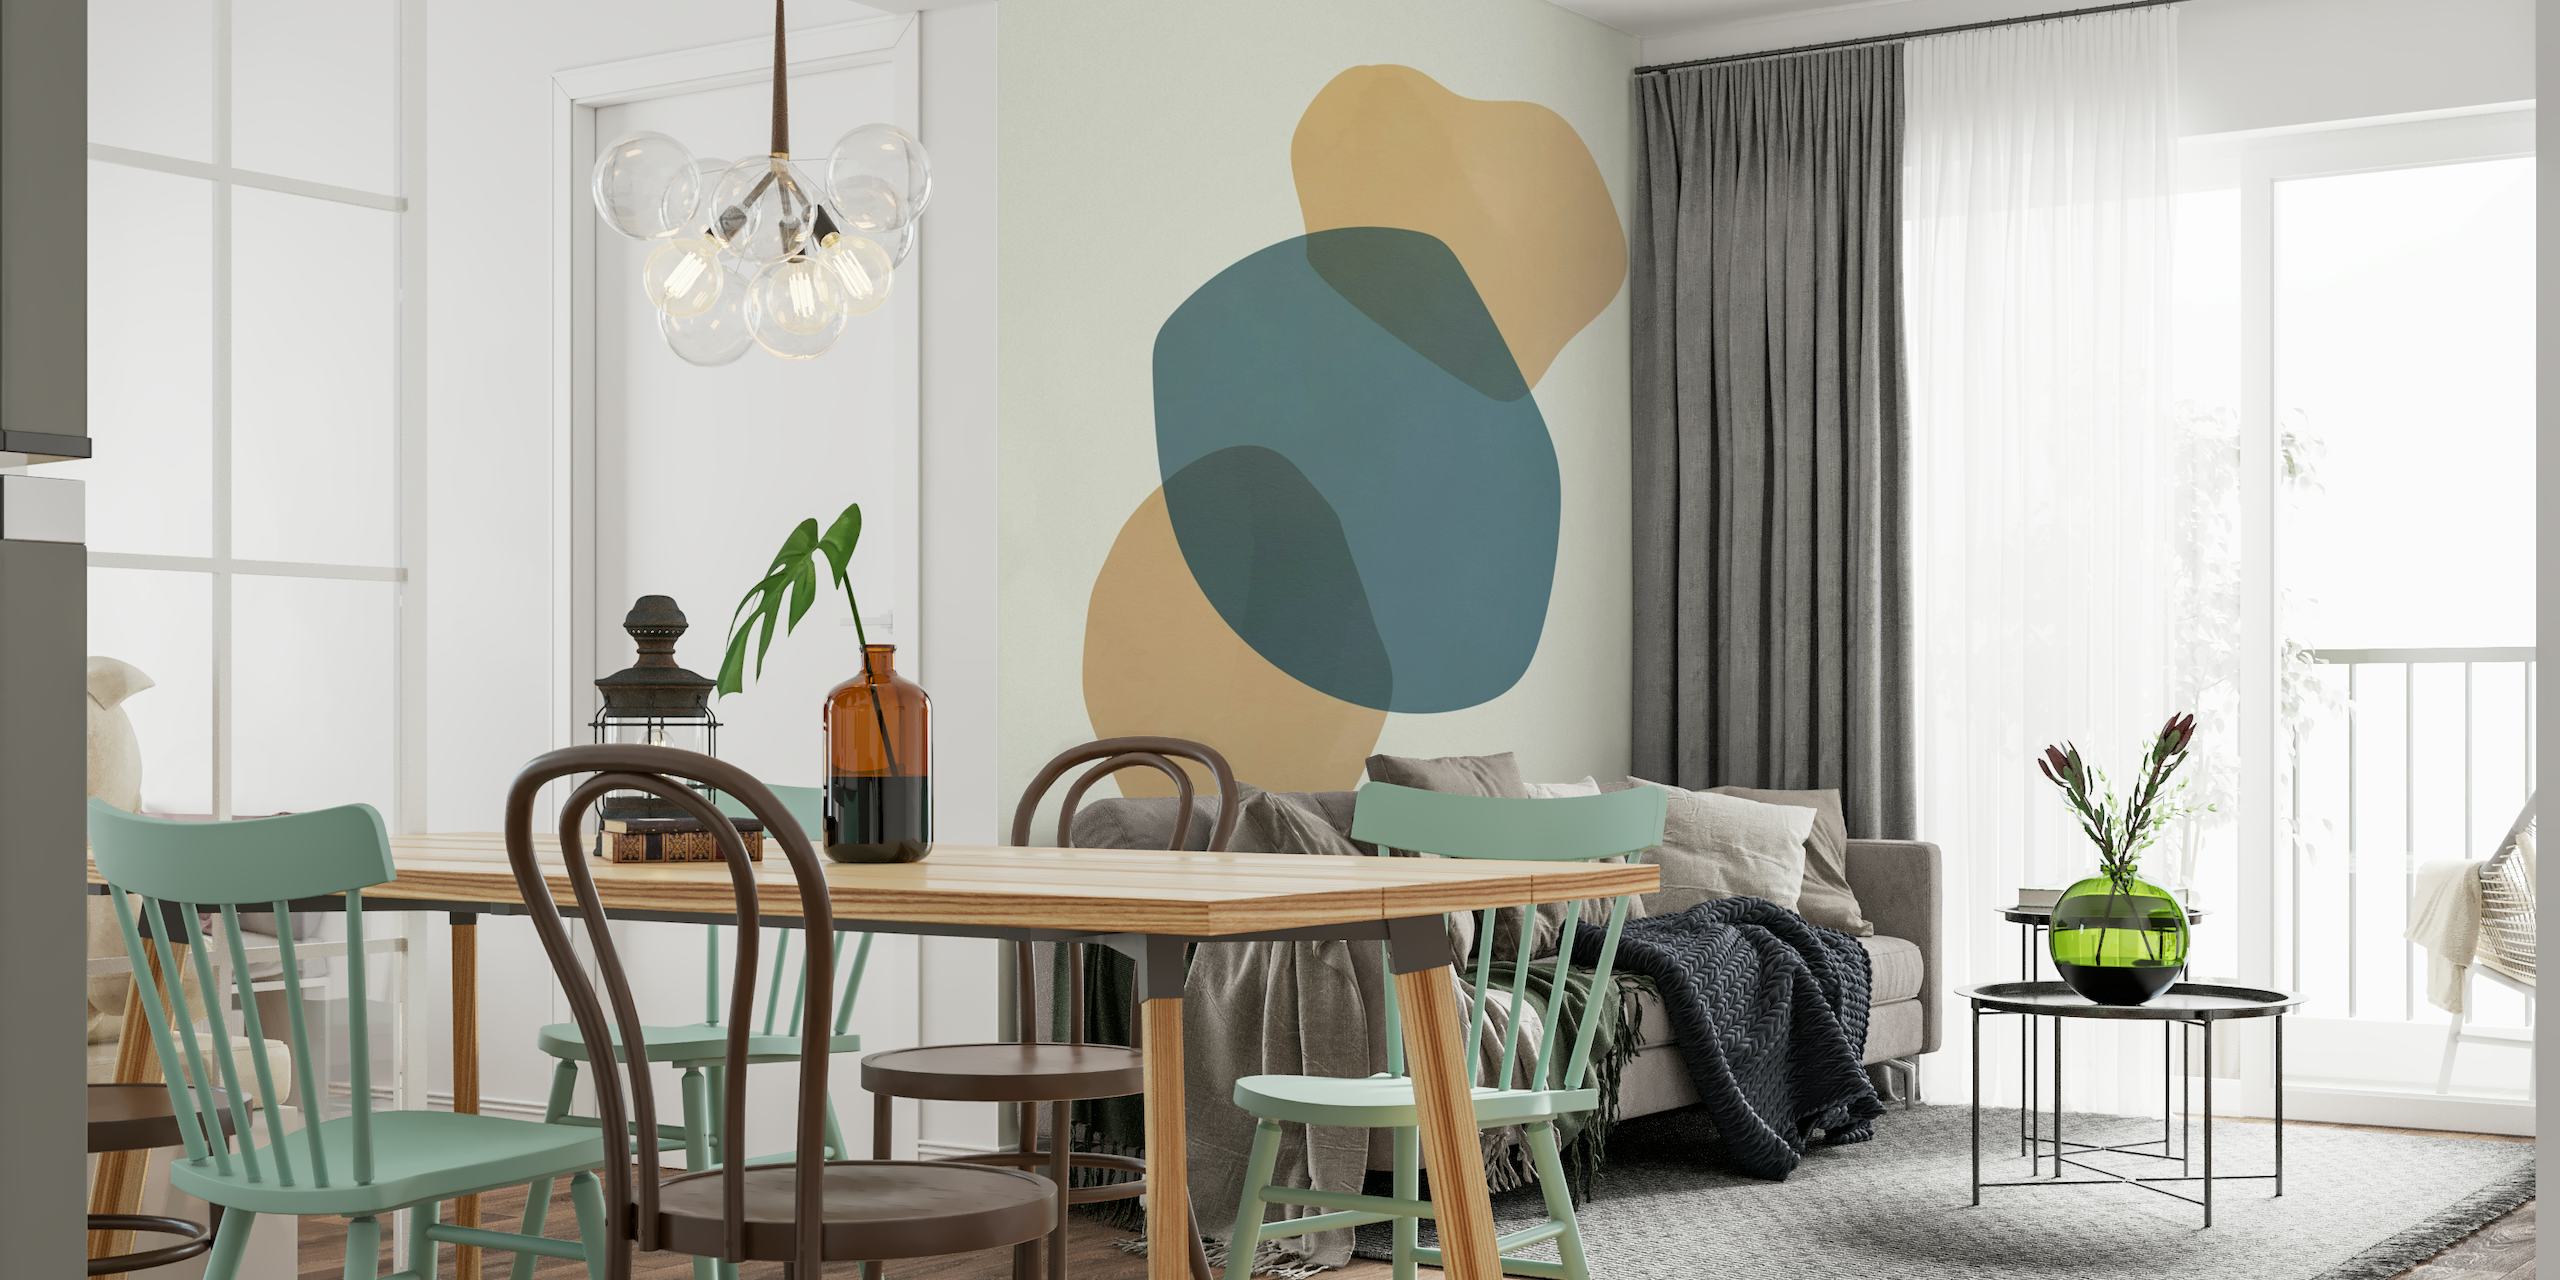 Minimalist abstract wall mural with earthy shapes and a silhouette of a couple